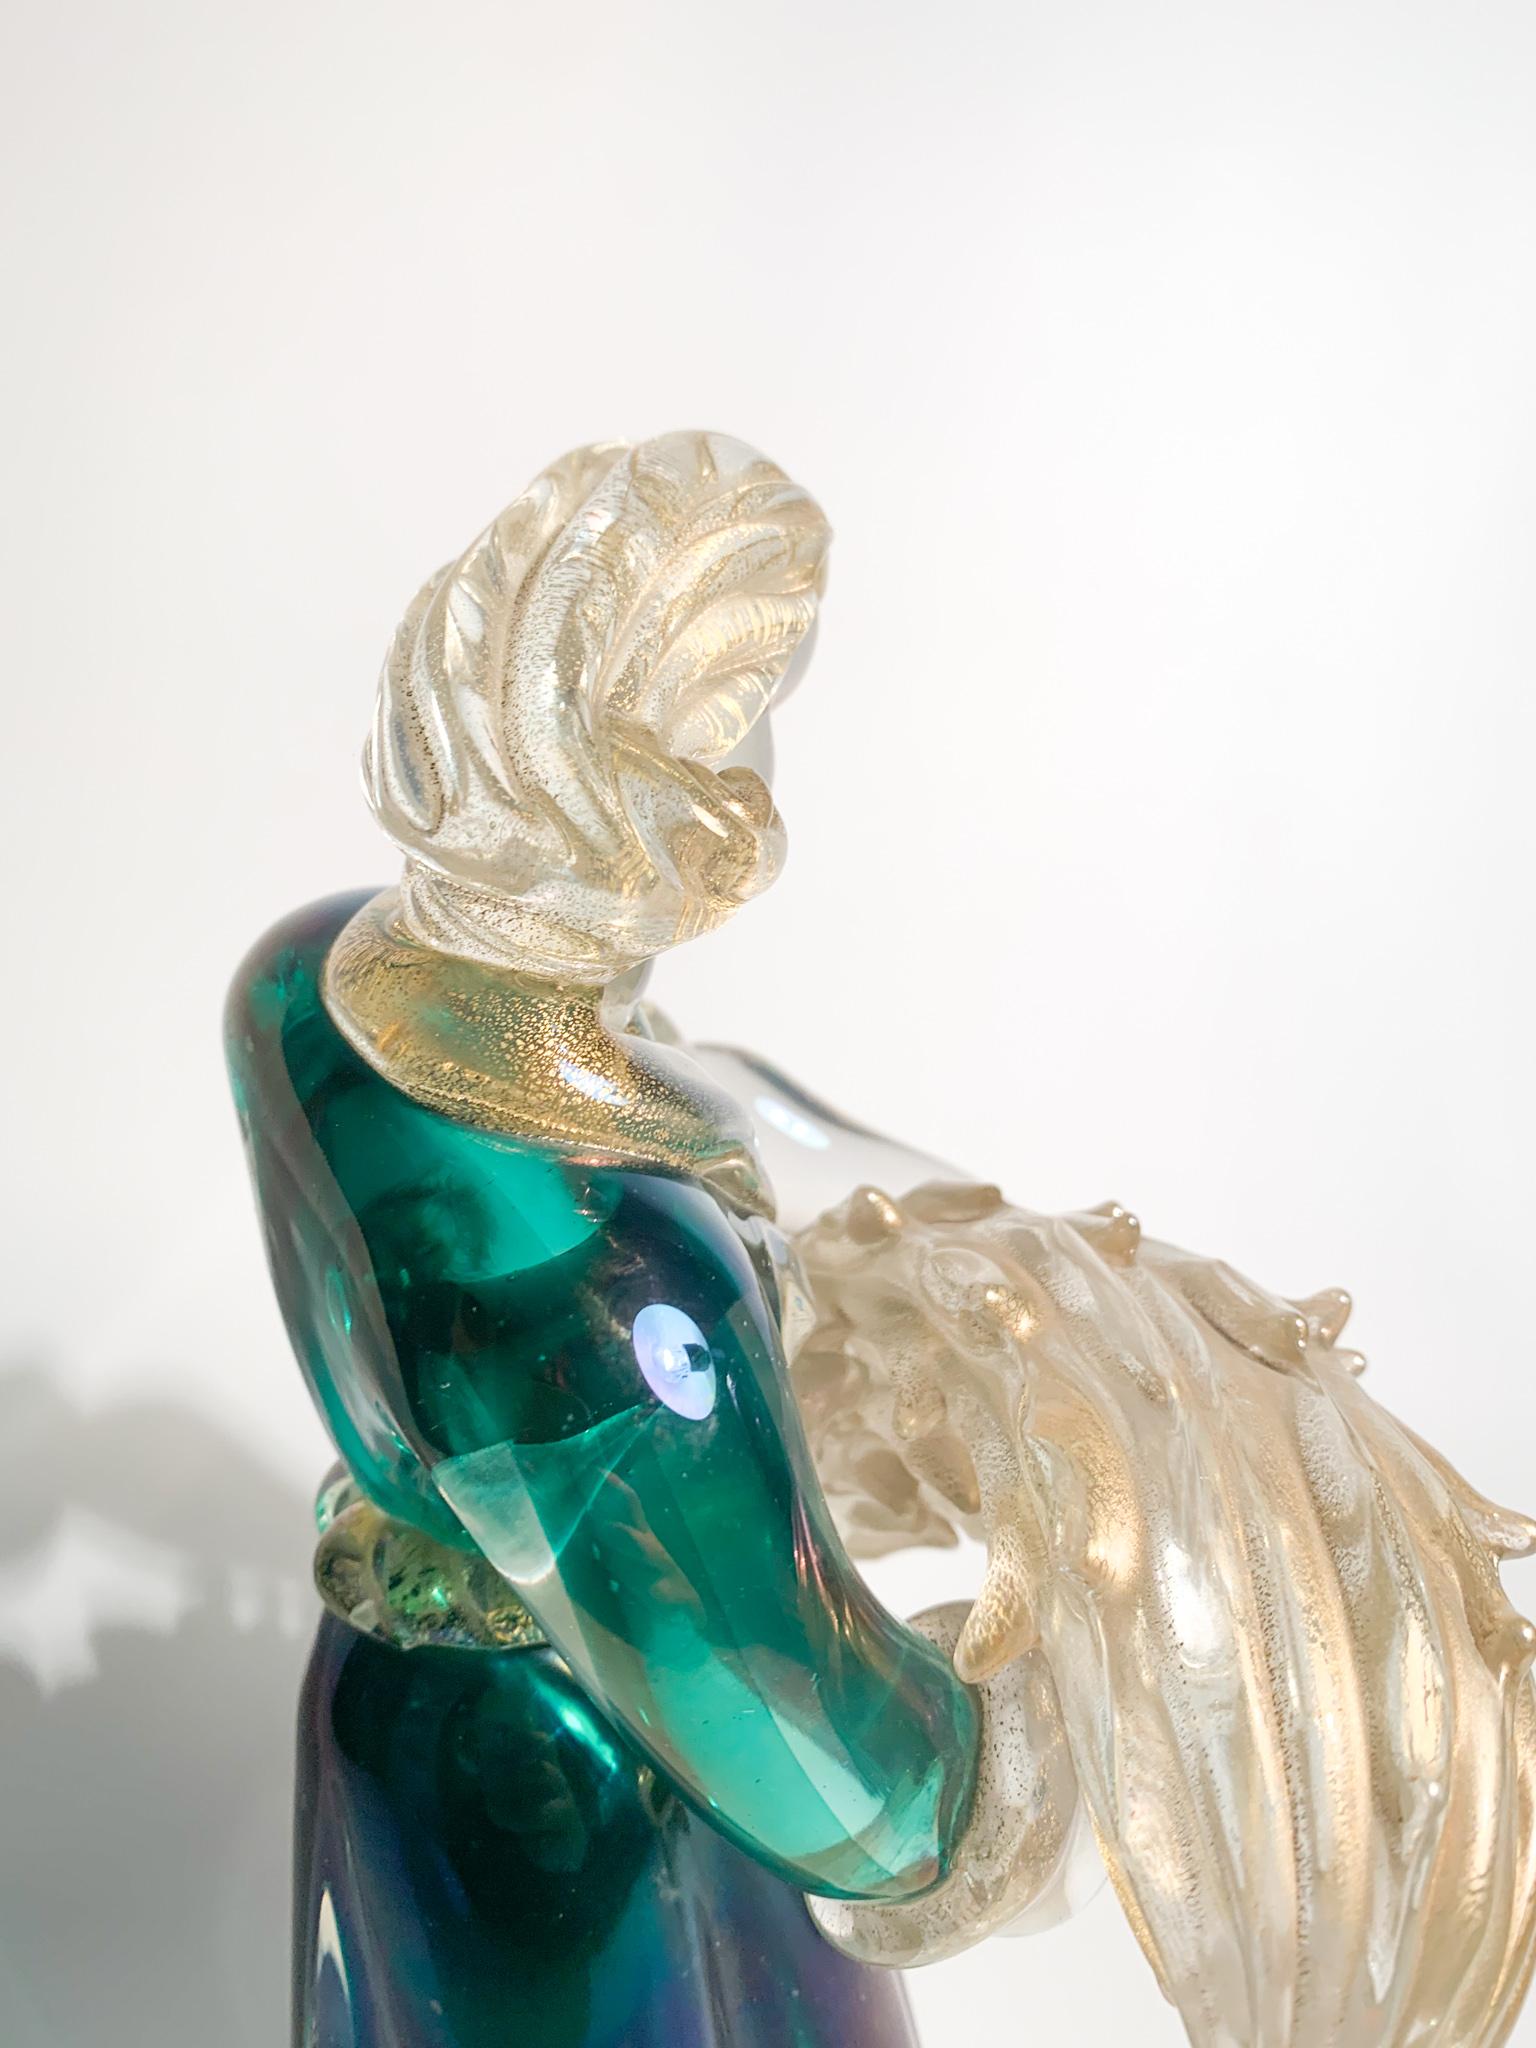 Iridescent Murano Glass Sculpture with Gold Leaves by Archimede Seguso 1940s In Good Condition For Sale In Milano, MI